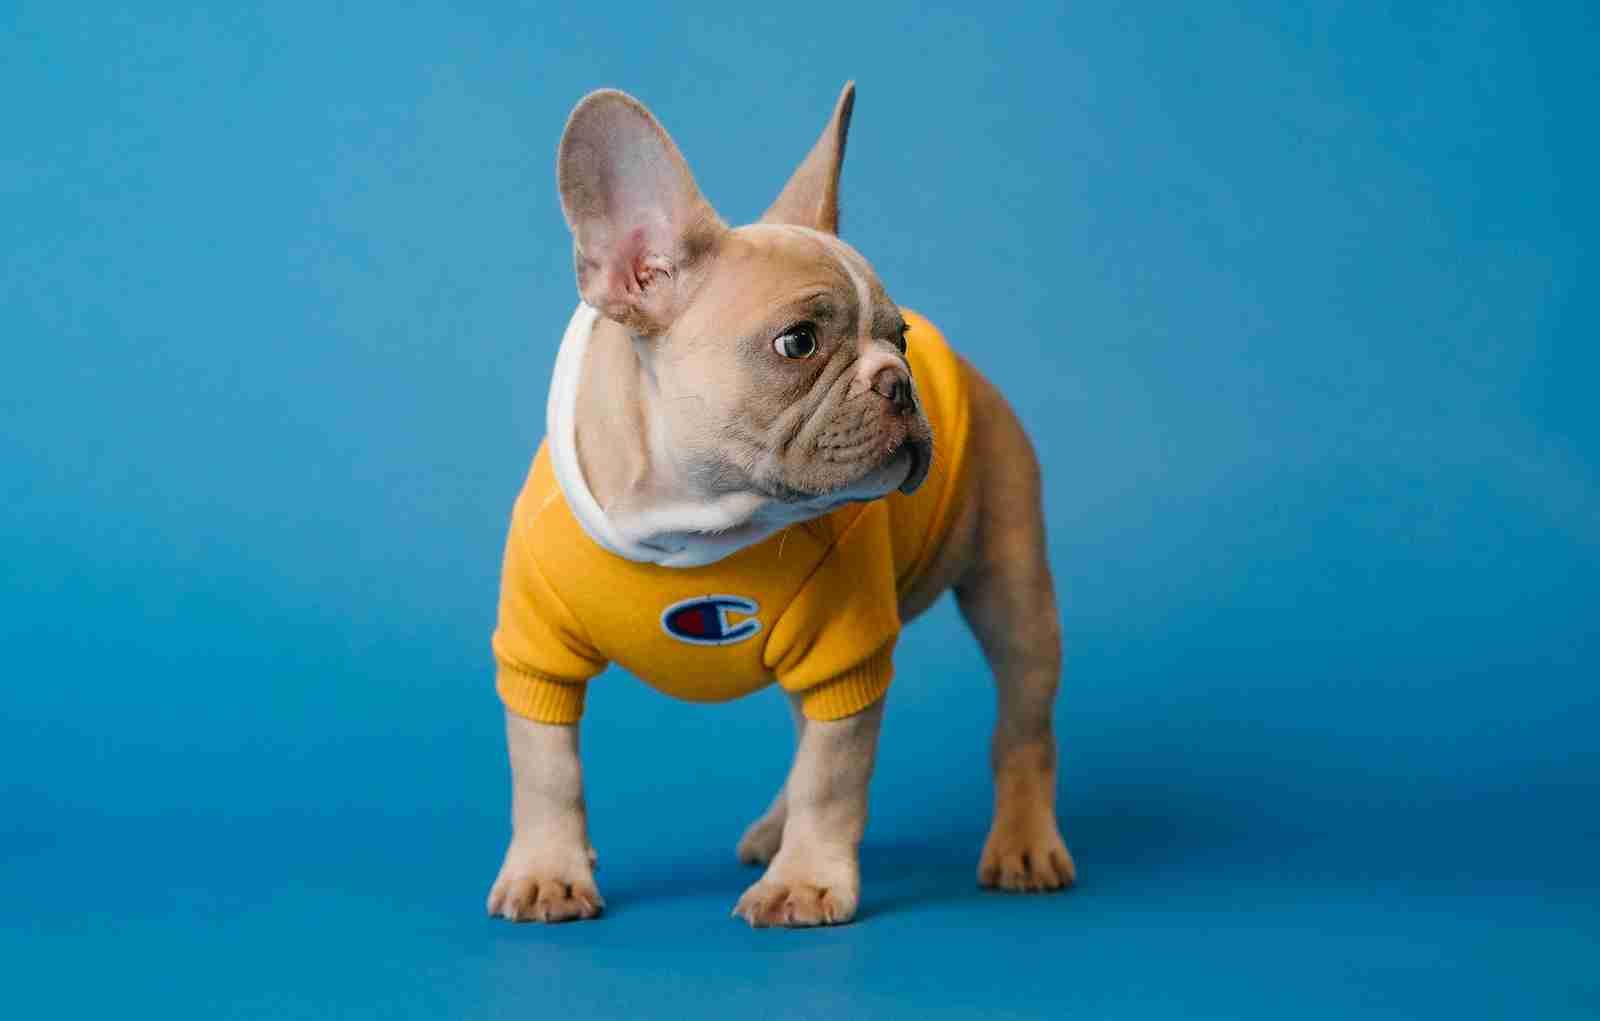 Experts consider all French bulldog varieties are a clean breed